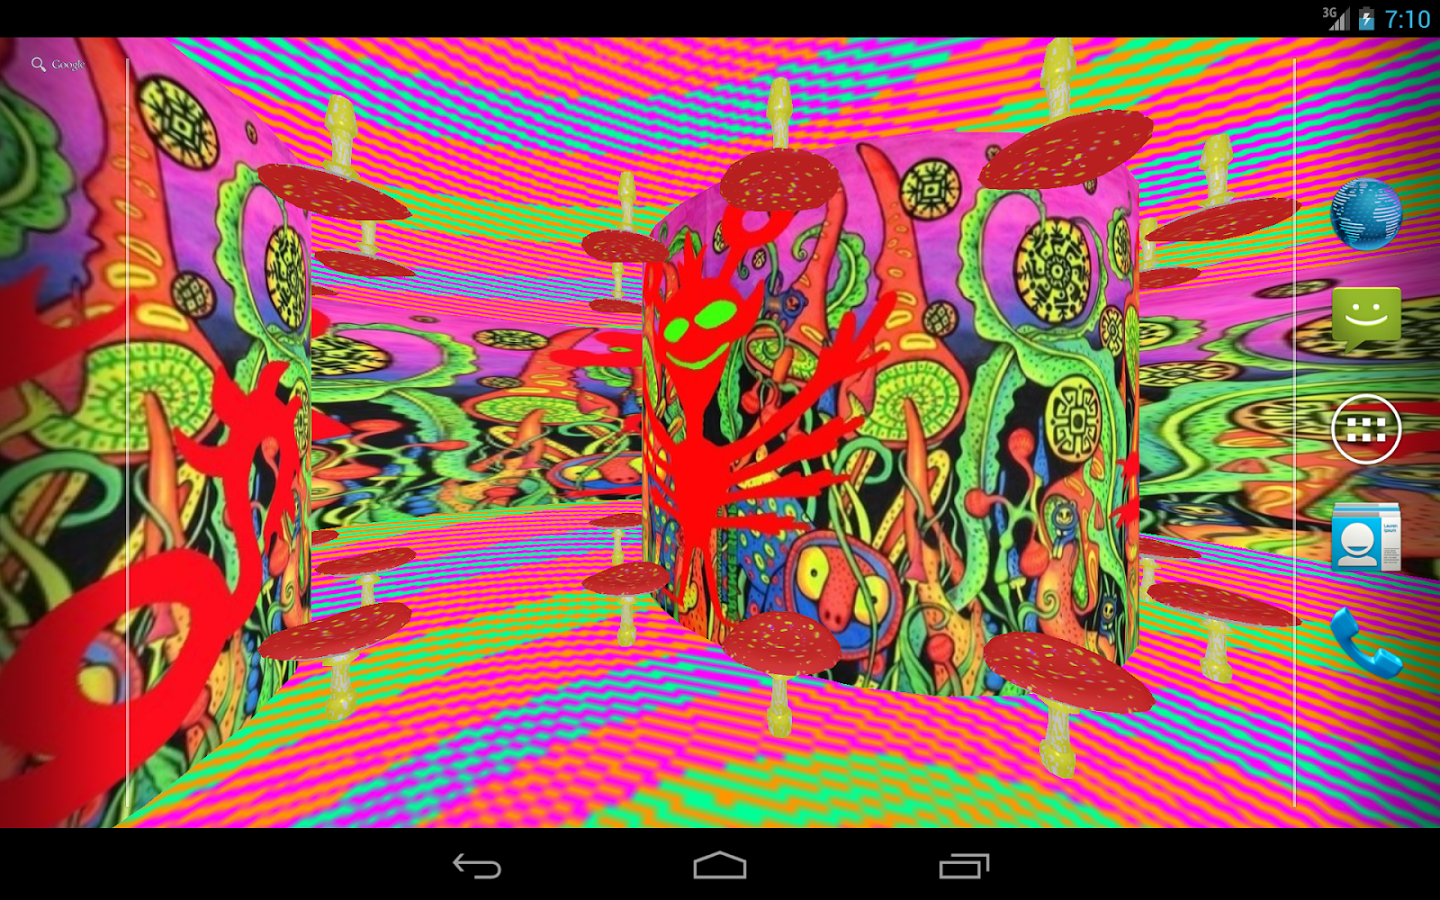 Description Cool Psychedelic Live Wallpaper In Fool 3d Mushrooms With